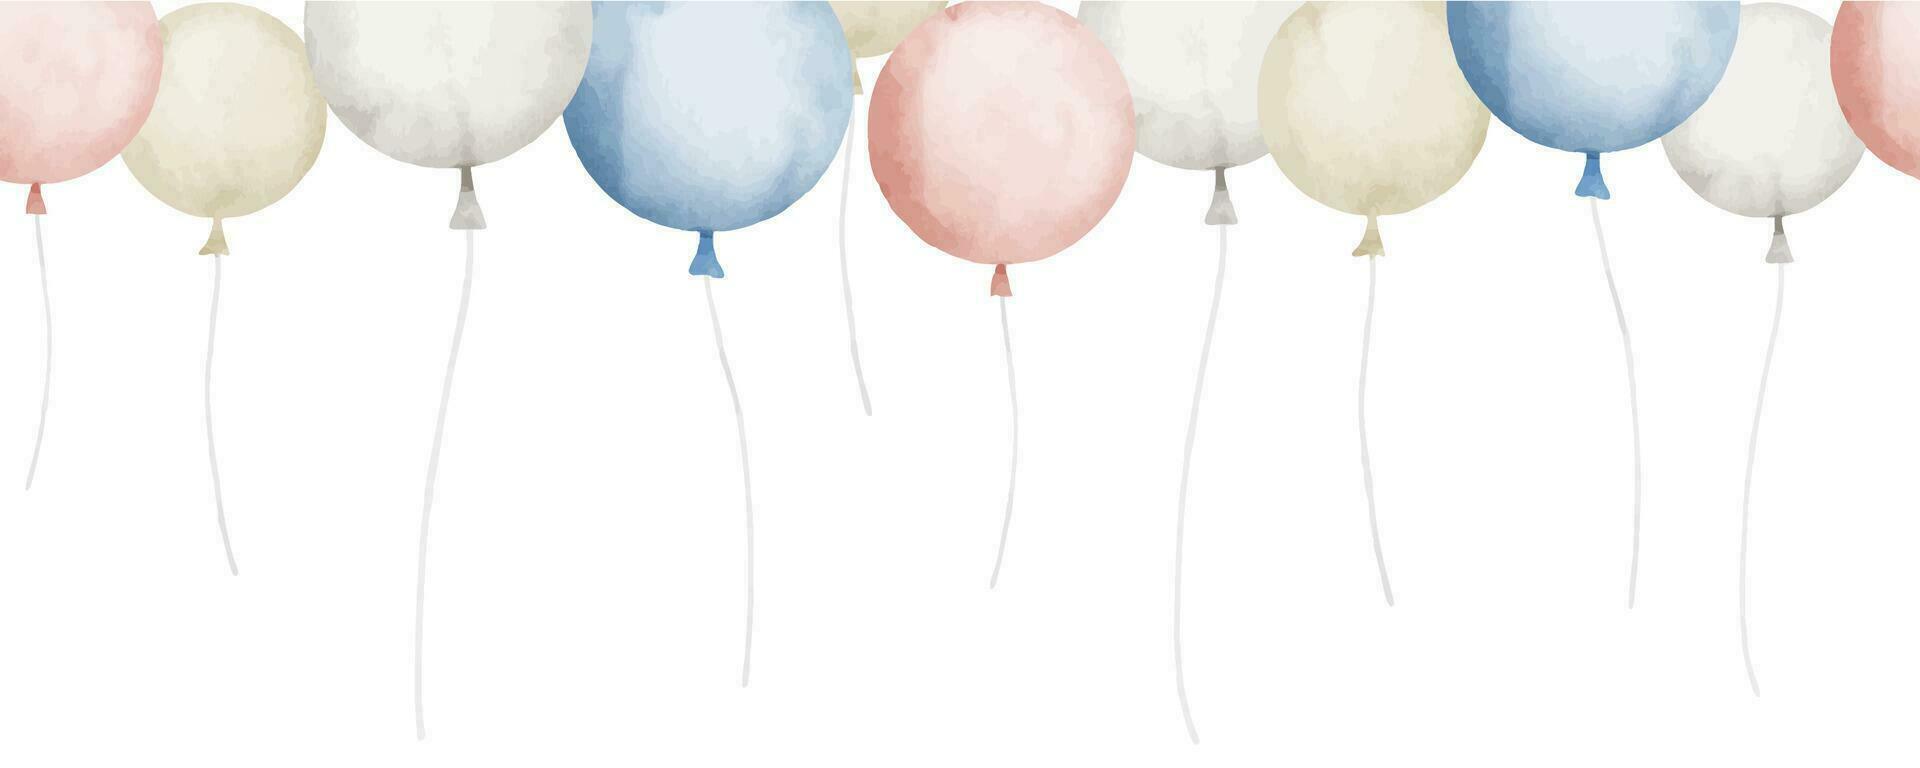 Seamless Border with air Balloons in pastel blue and beige colors. Hand drawn watercolor illustration for Happy Birthday greeting cards or invitations. Pattern for Frame on isolated background vector